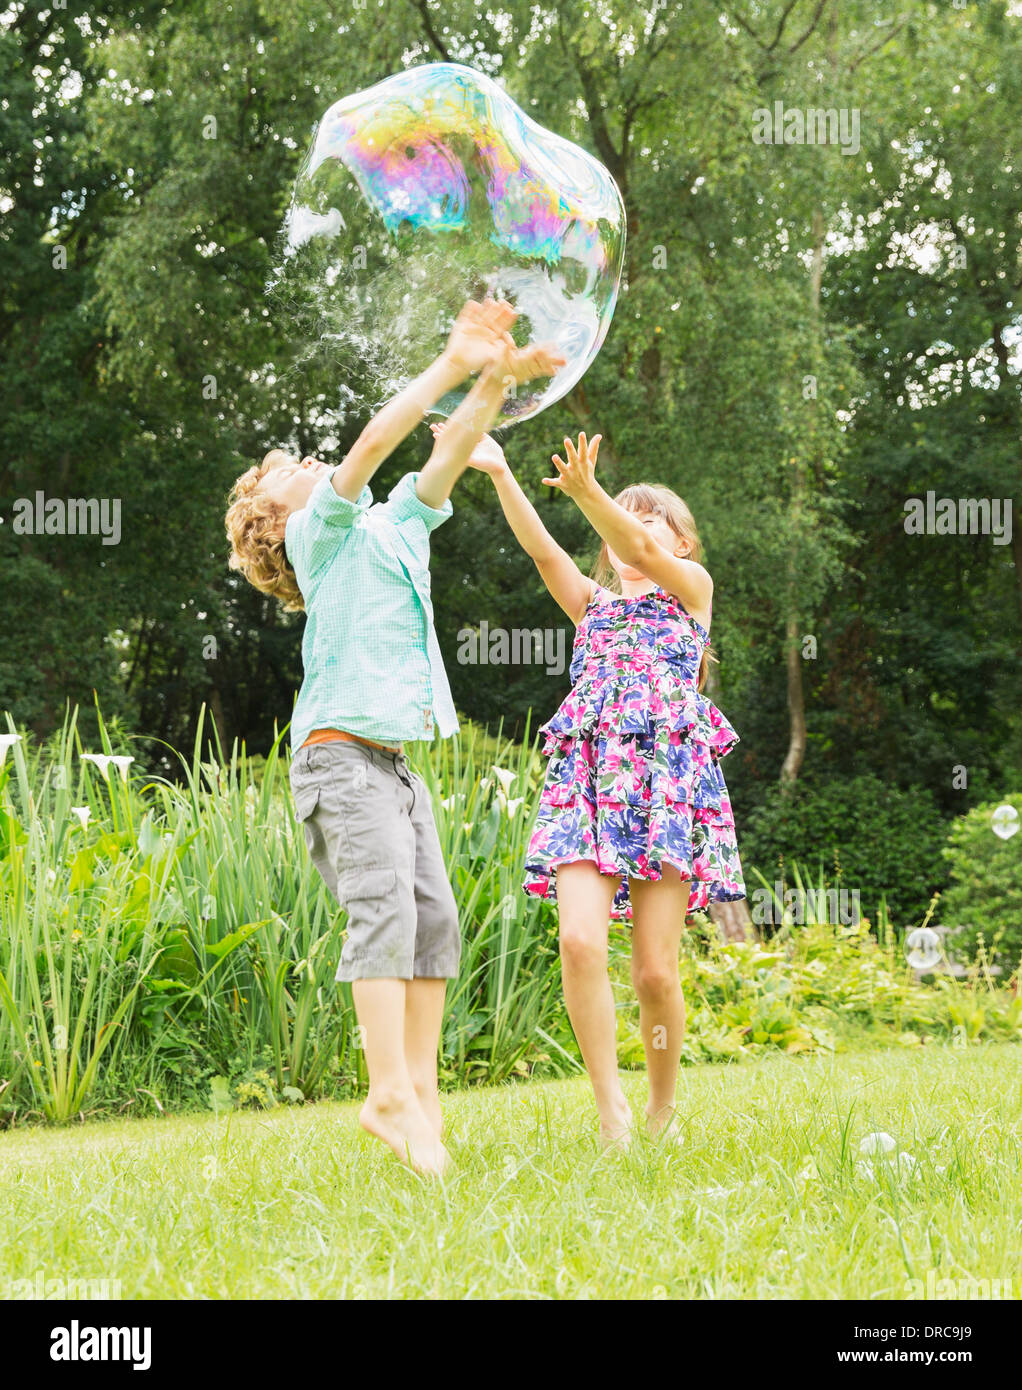 Children playing with bubble outdoors Stock Photo